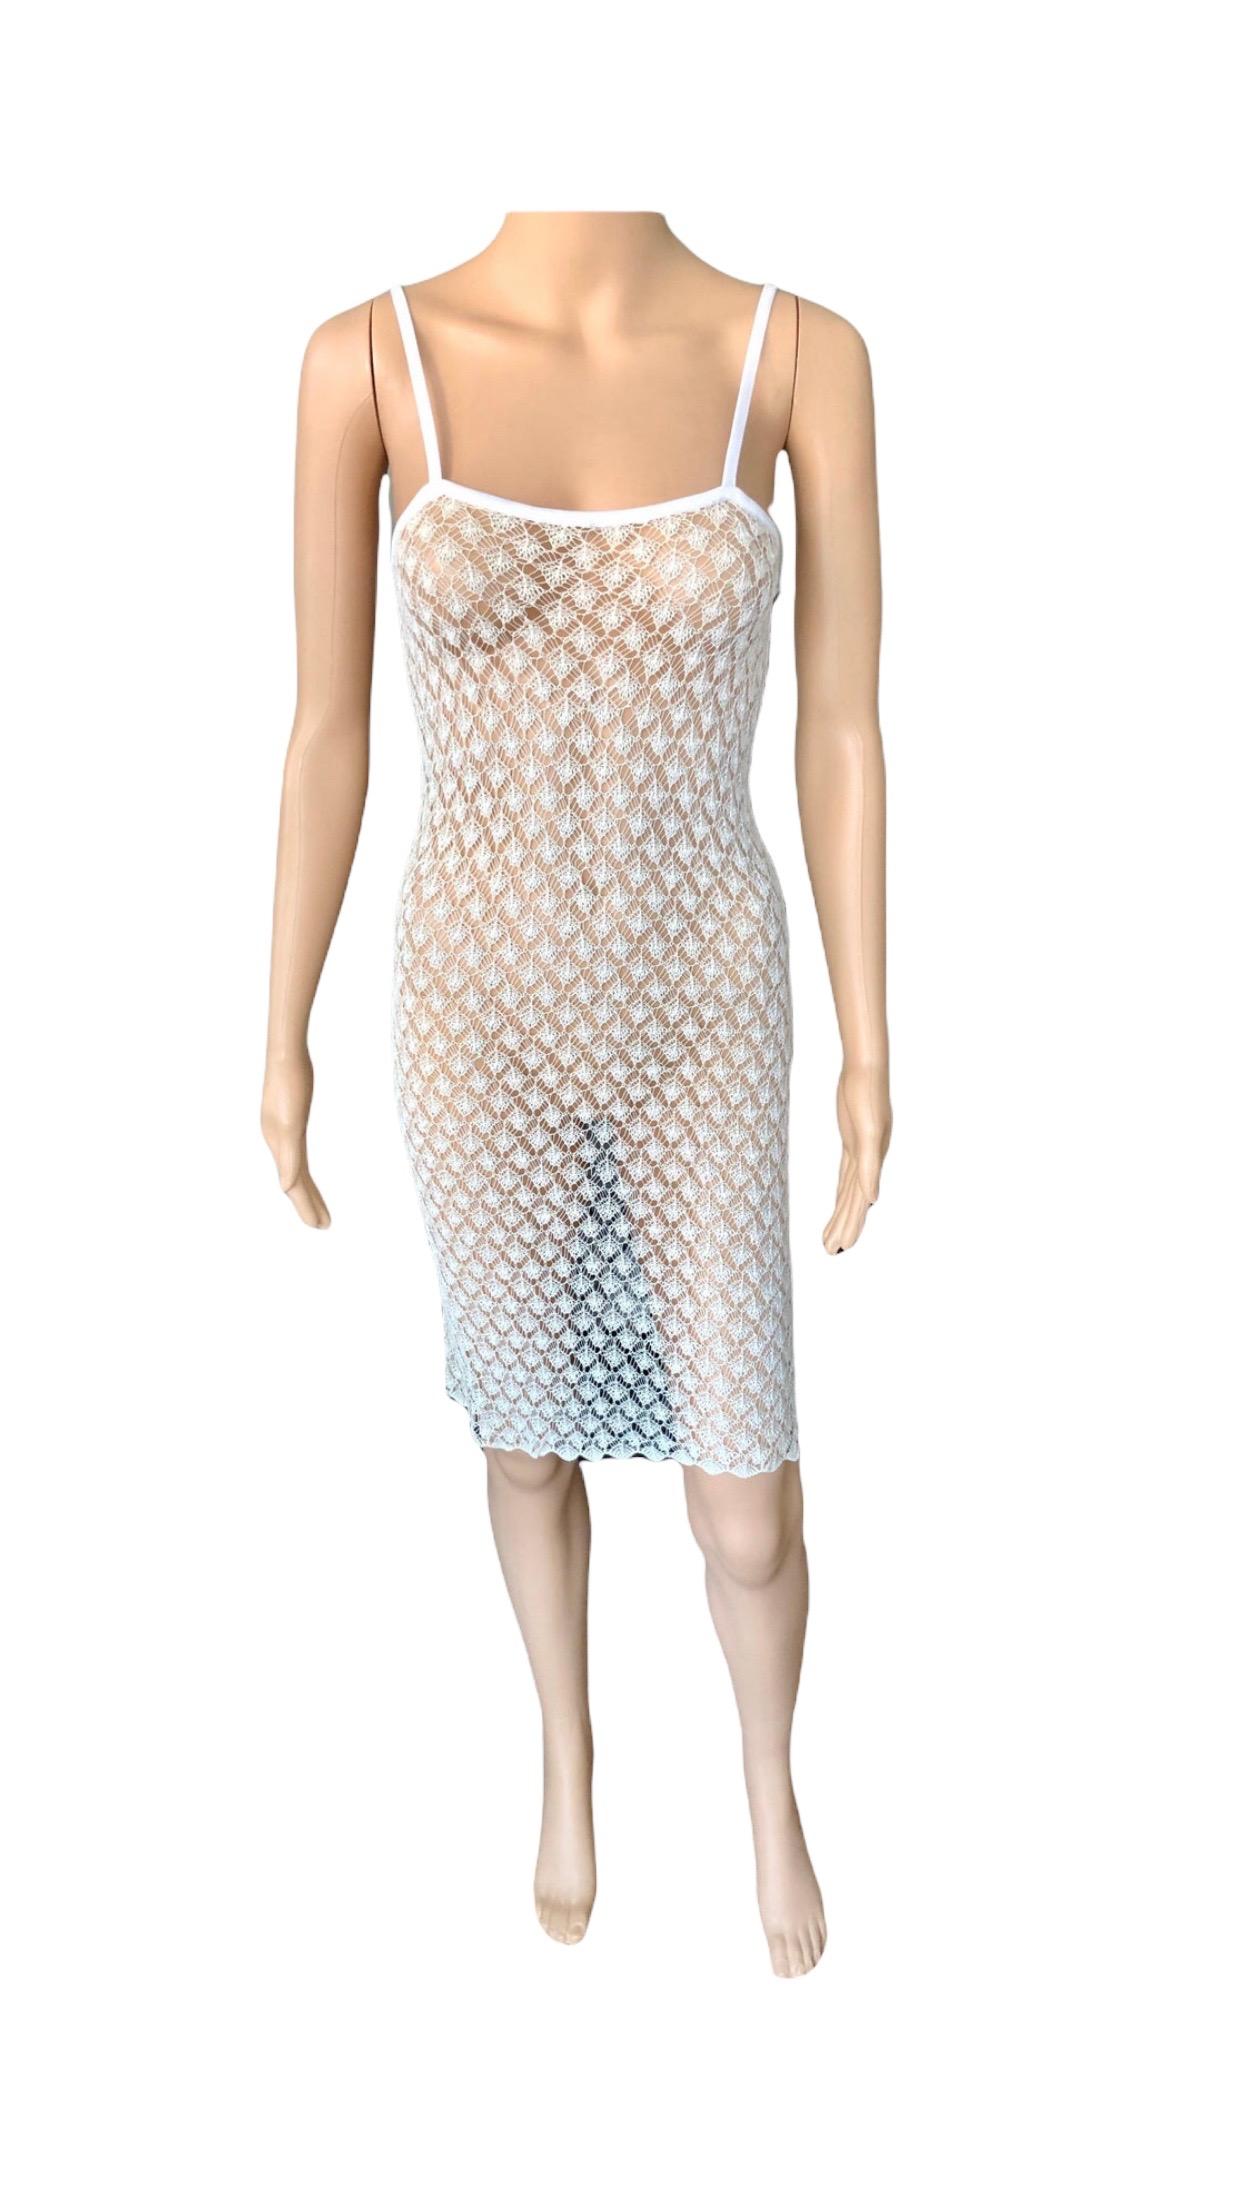 Versace Classic 1990's Sheer Open Knit Ivory Dress In Good Condition For Sale In Naples, FL